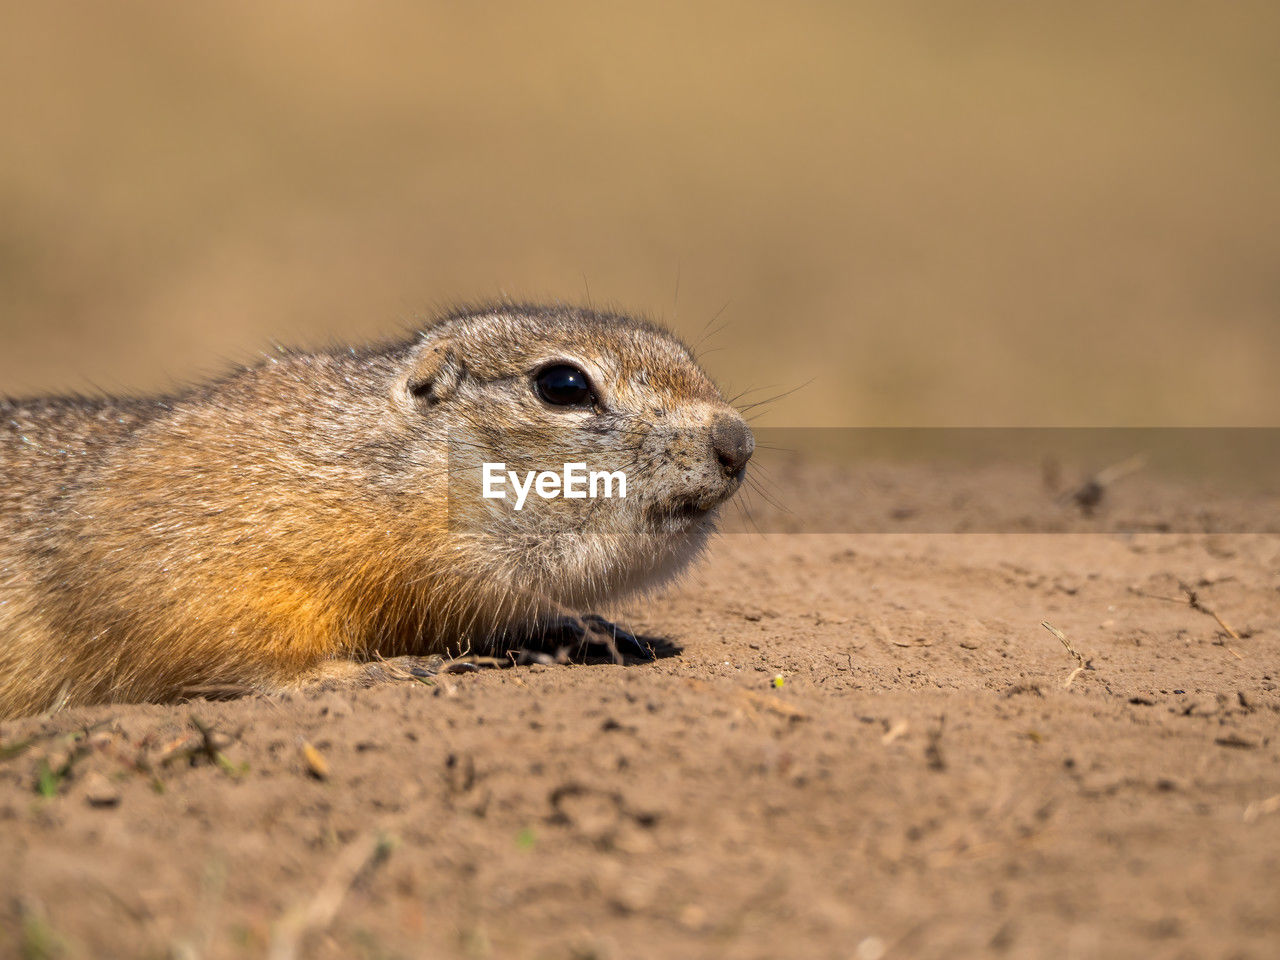 animal, animal themes, animal wildlife, one animal, wildlife, prairie dog, mammal, whiskers, rodent, no people, squirrel, close-up, nature, land, selective focus, outdoors, day, side view, portrait